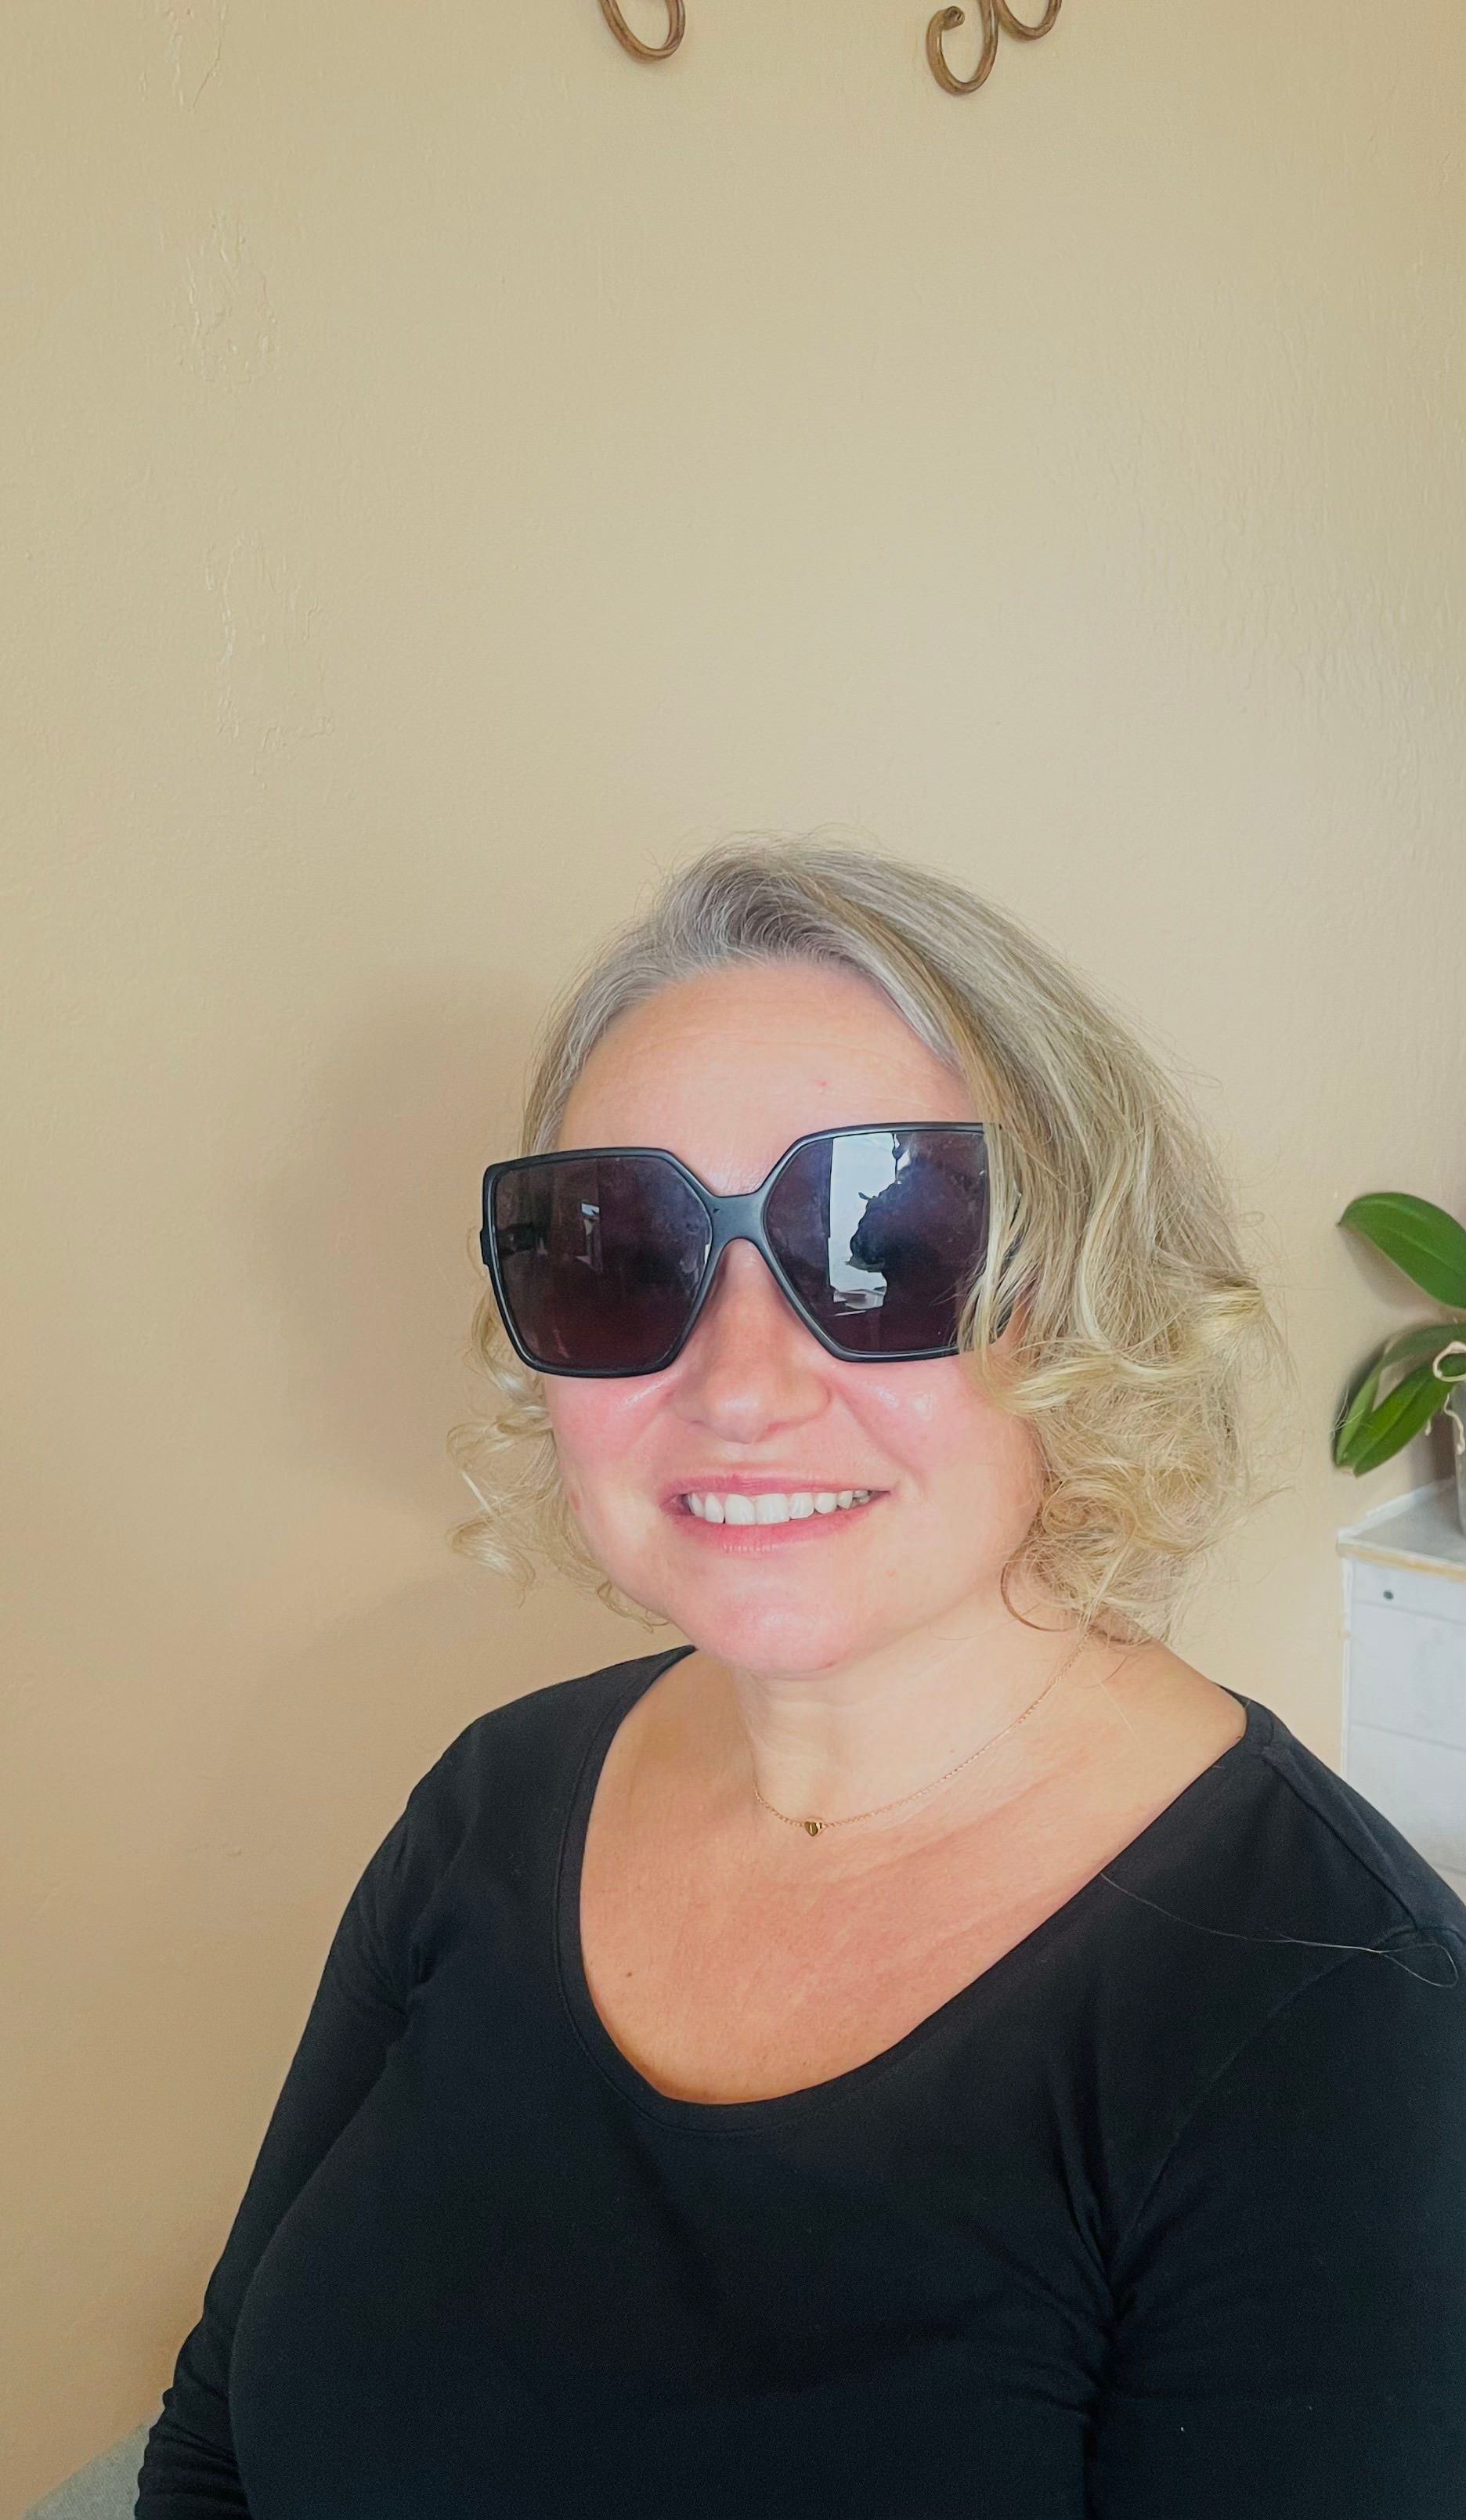 a woman wearing sunglasses and a black shirt is smiling .